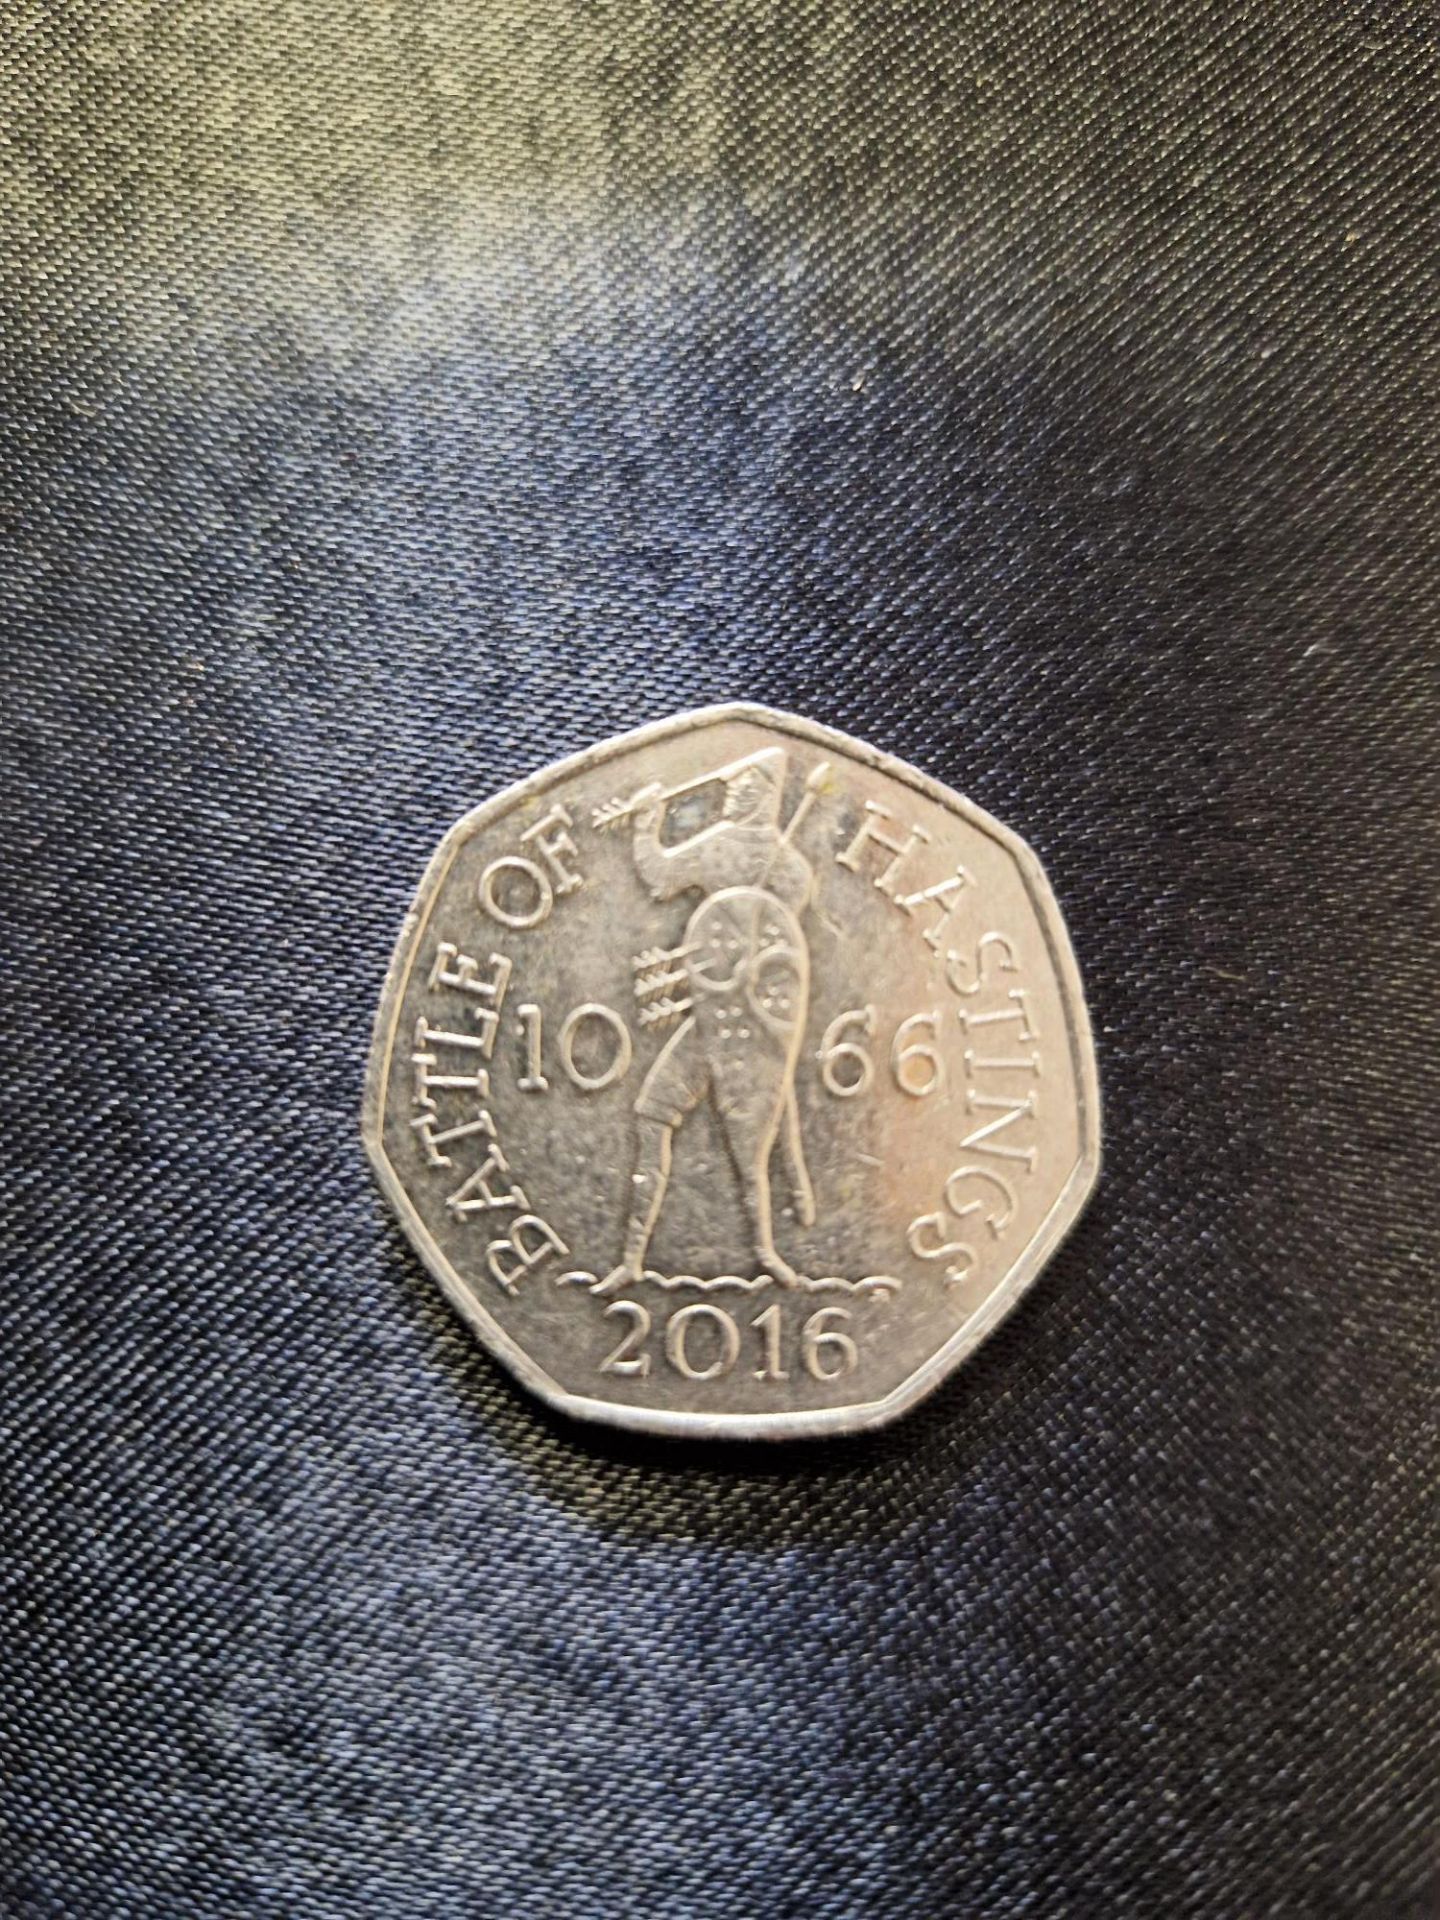 Collectors 50p coin